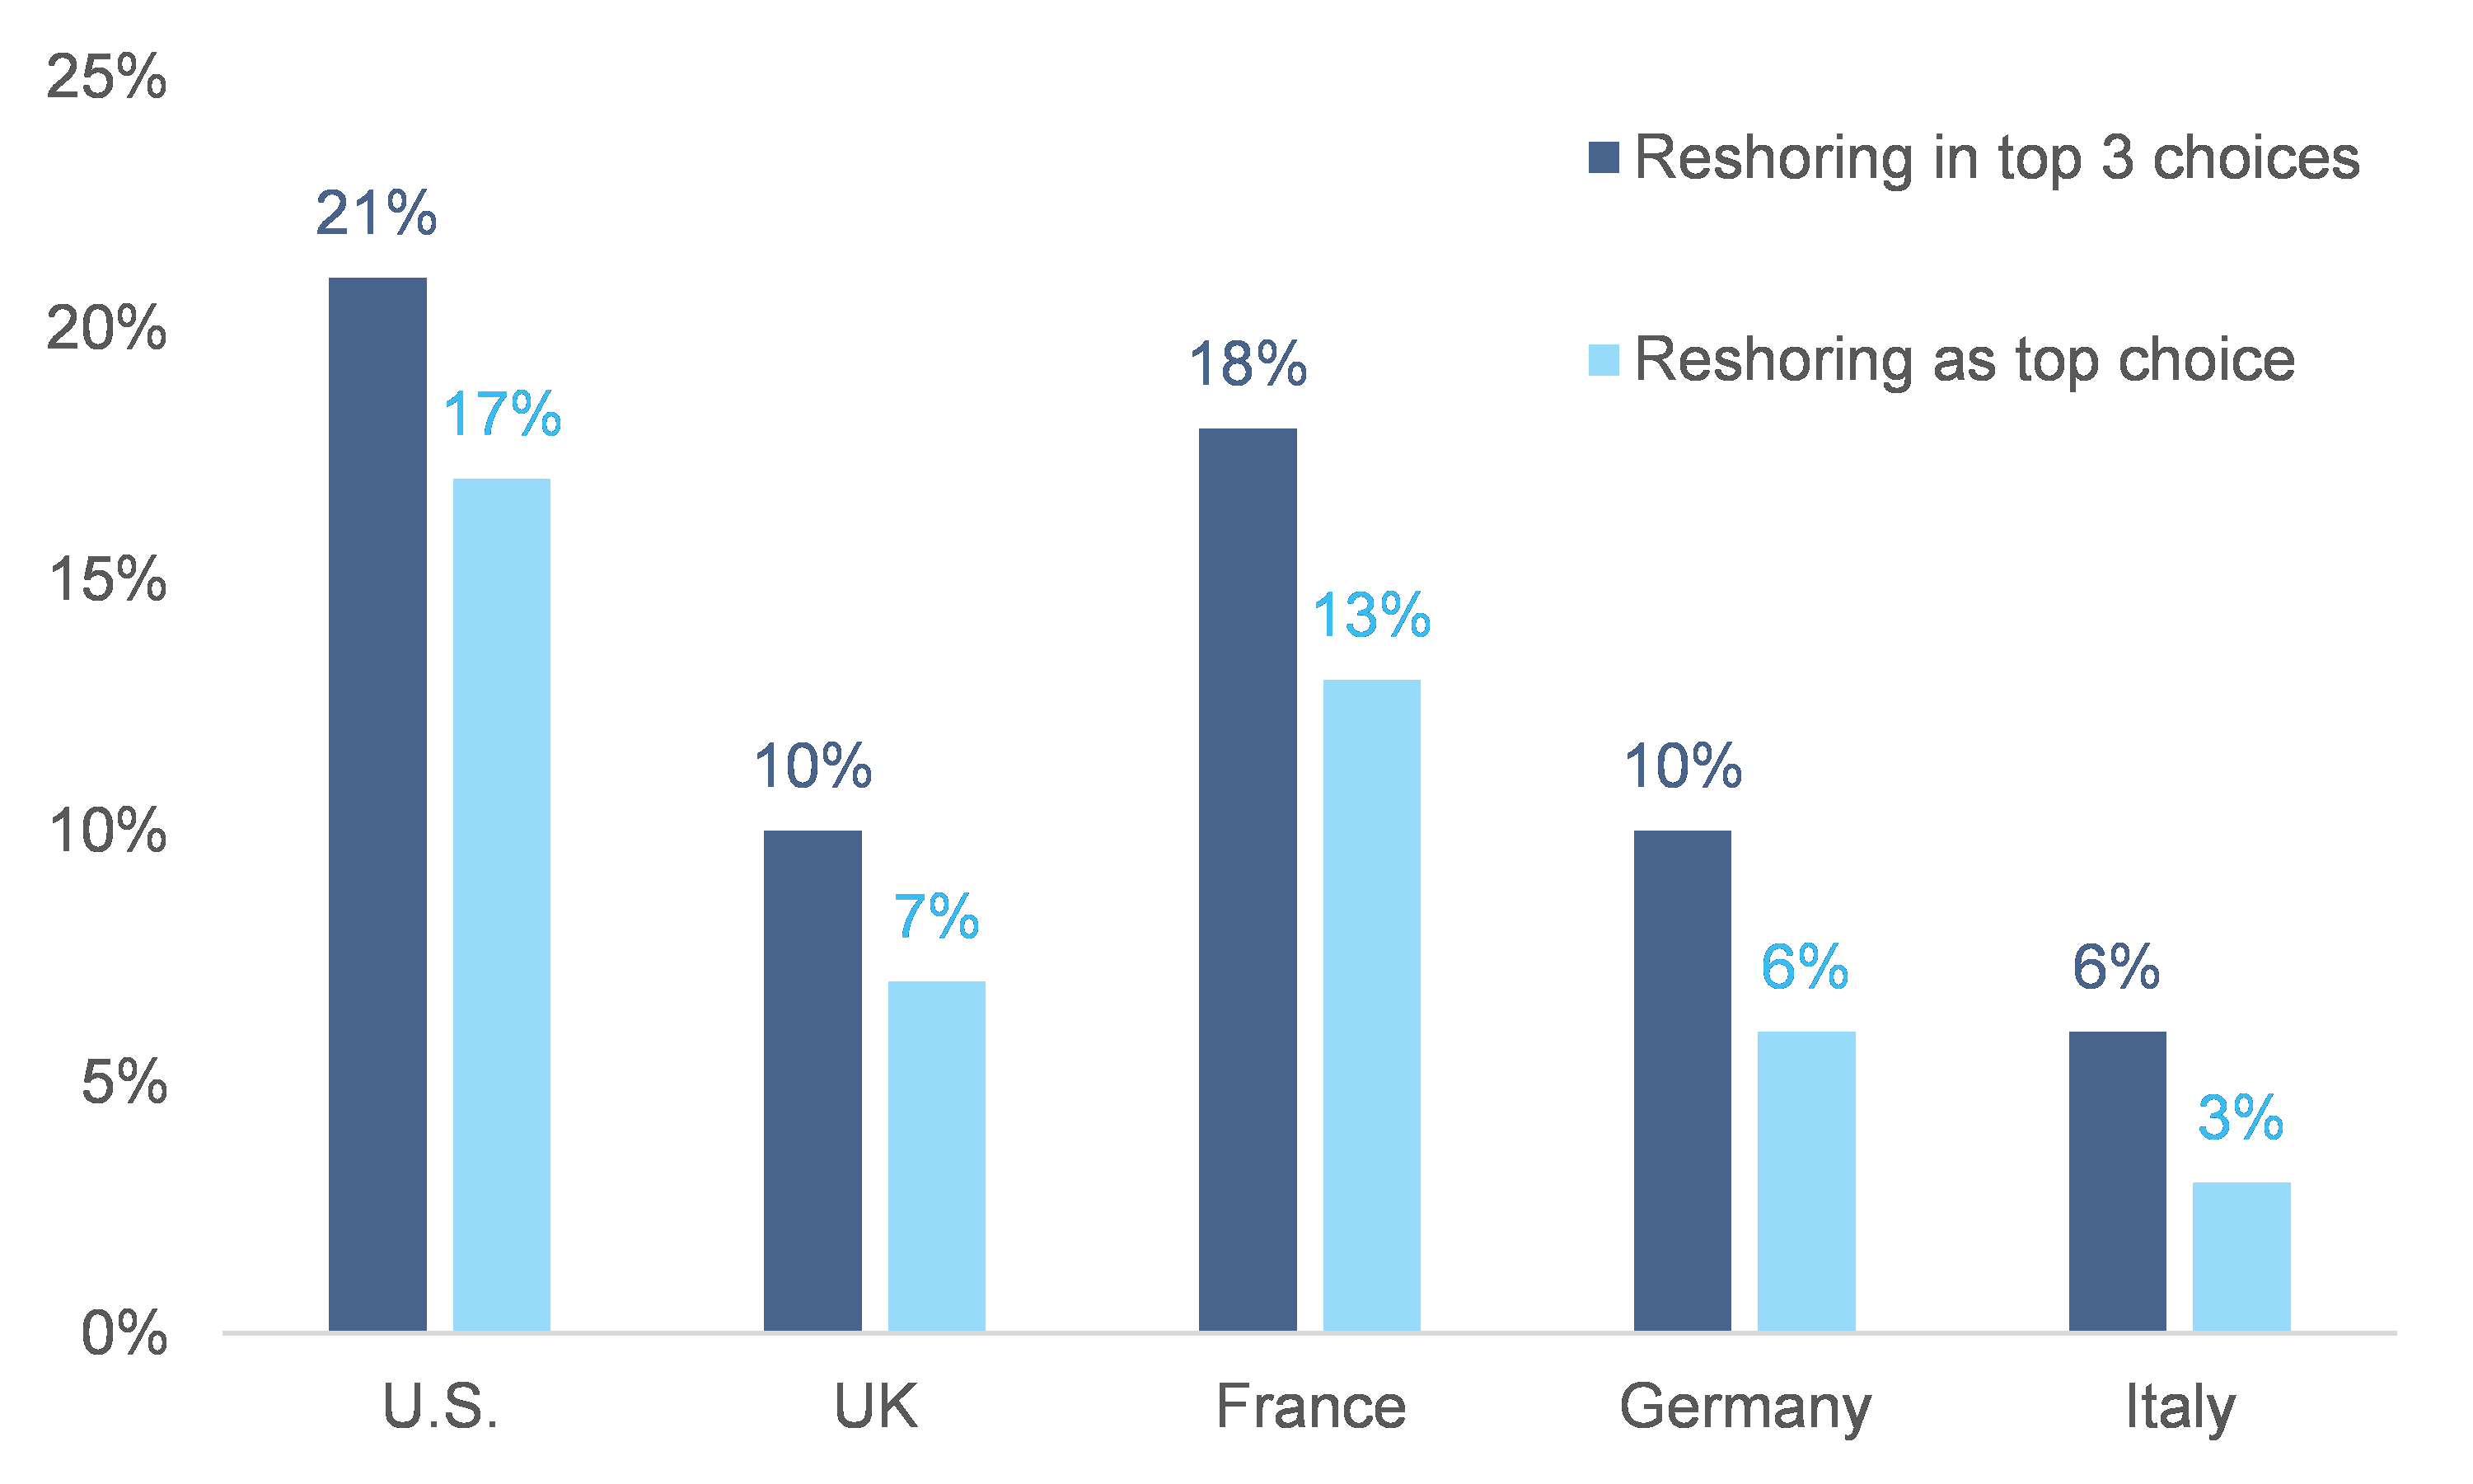 Figure 8: Share of companies considering reshoring, by current main country location